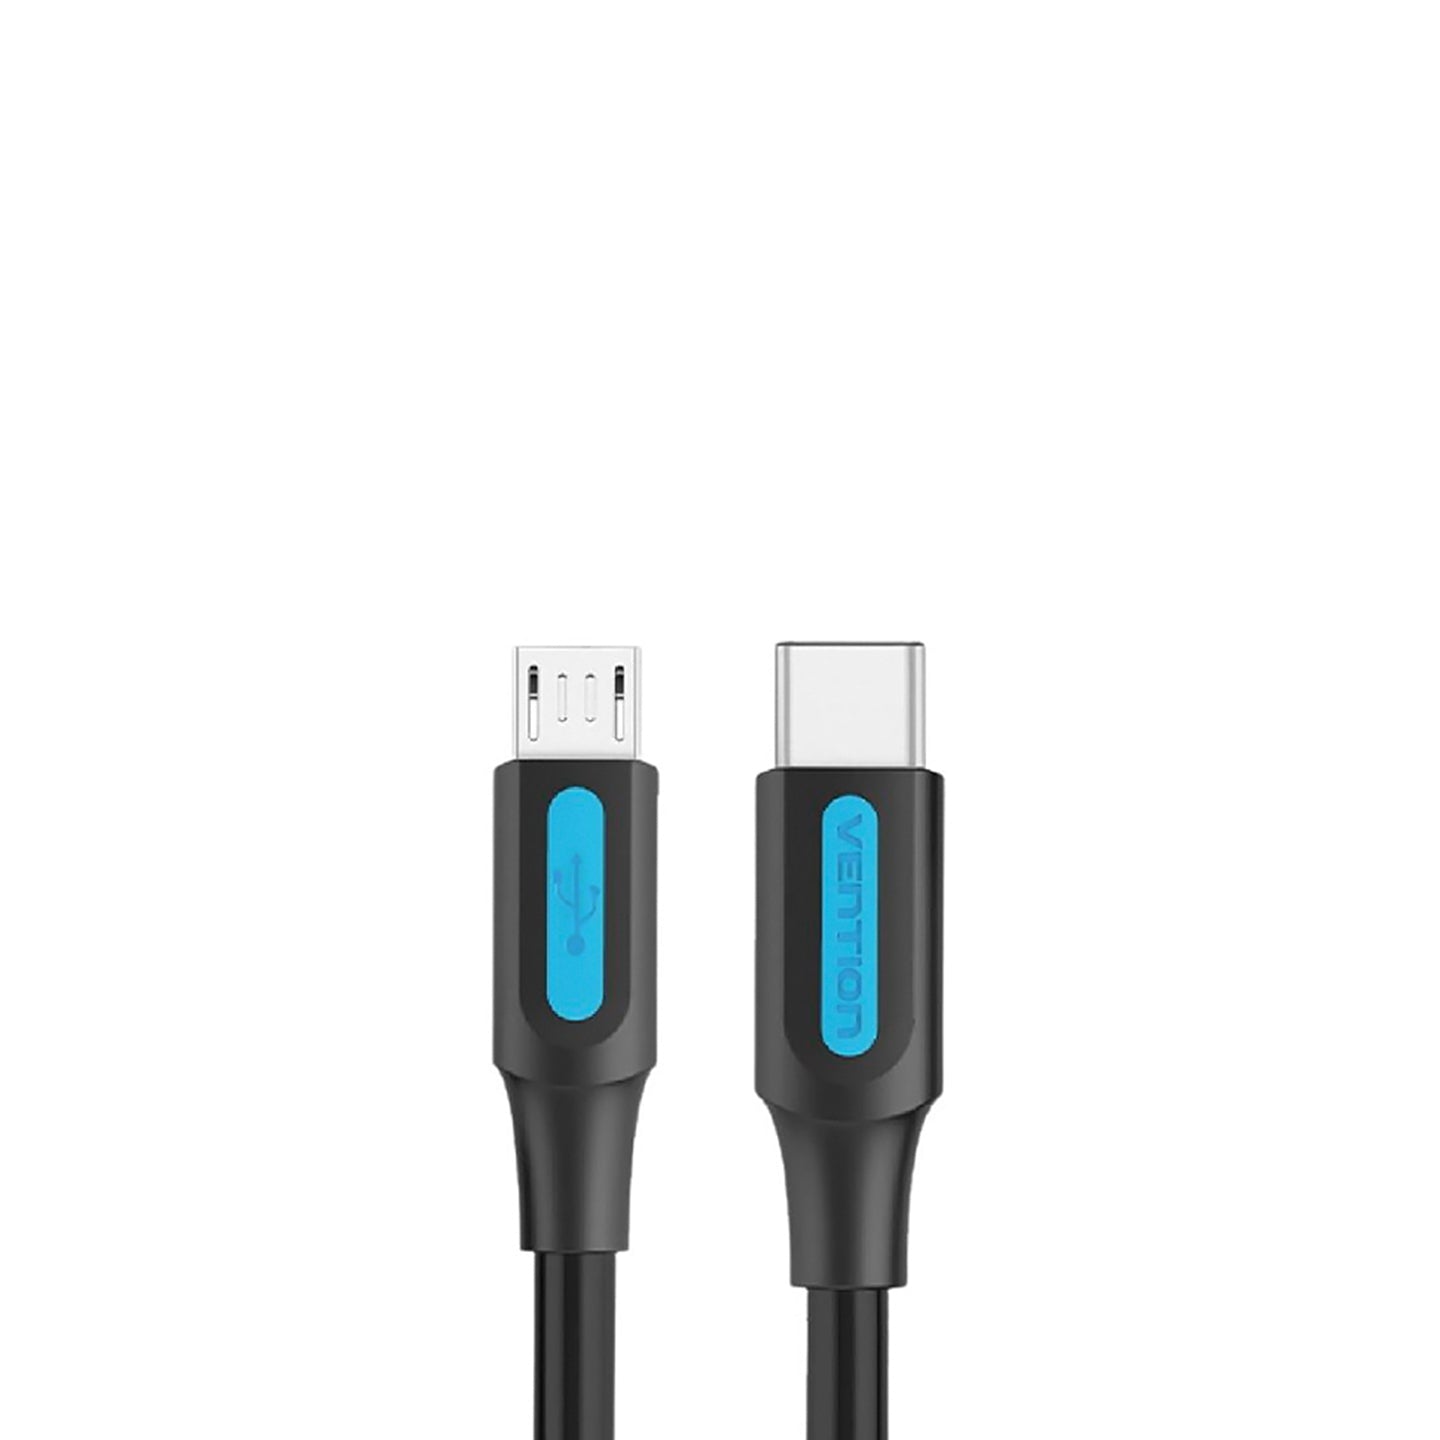 Vention USB 2.0 C Male to Micro-B Male 2A Data Cable with High Speed Interface for Camera, Computer, Smartphones, MP3 (Available in 1M, 1.5M) | COVBF, COVBG